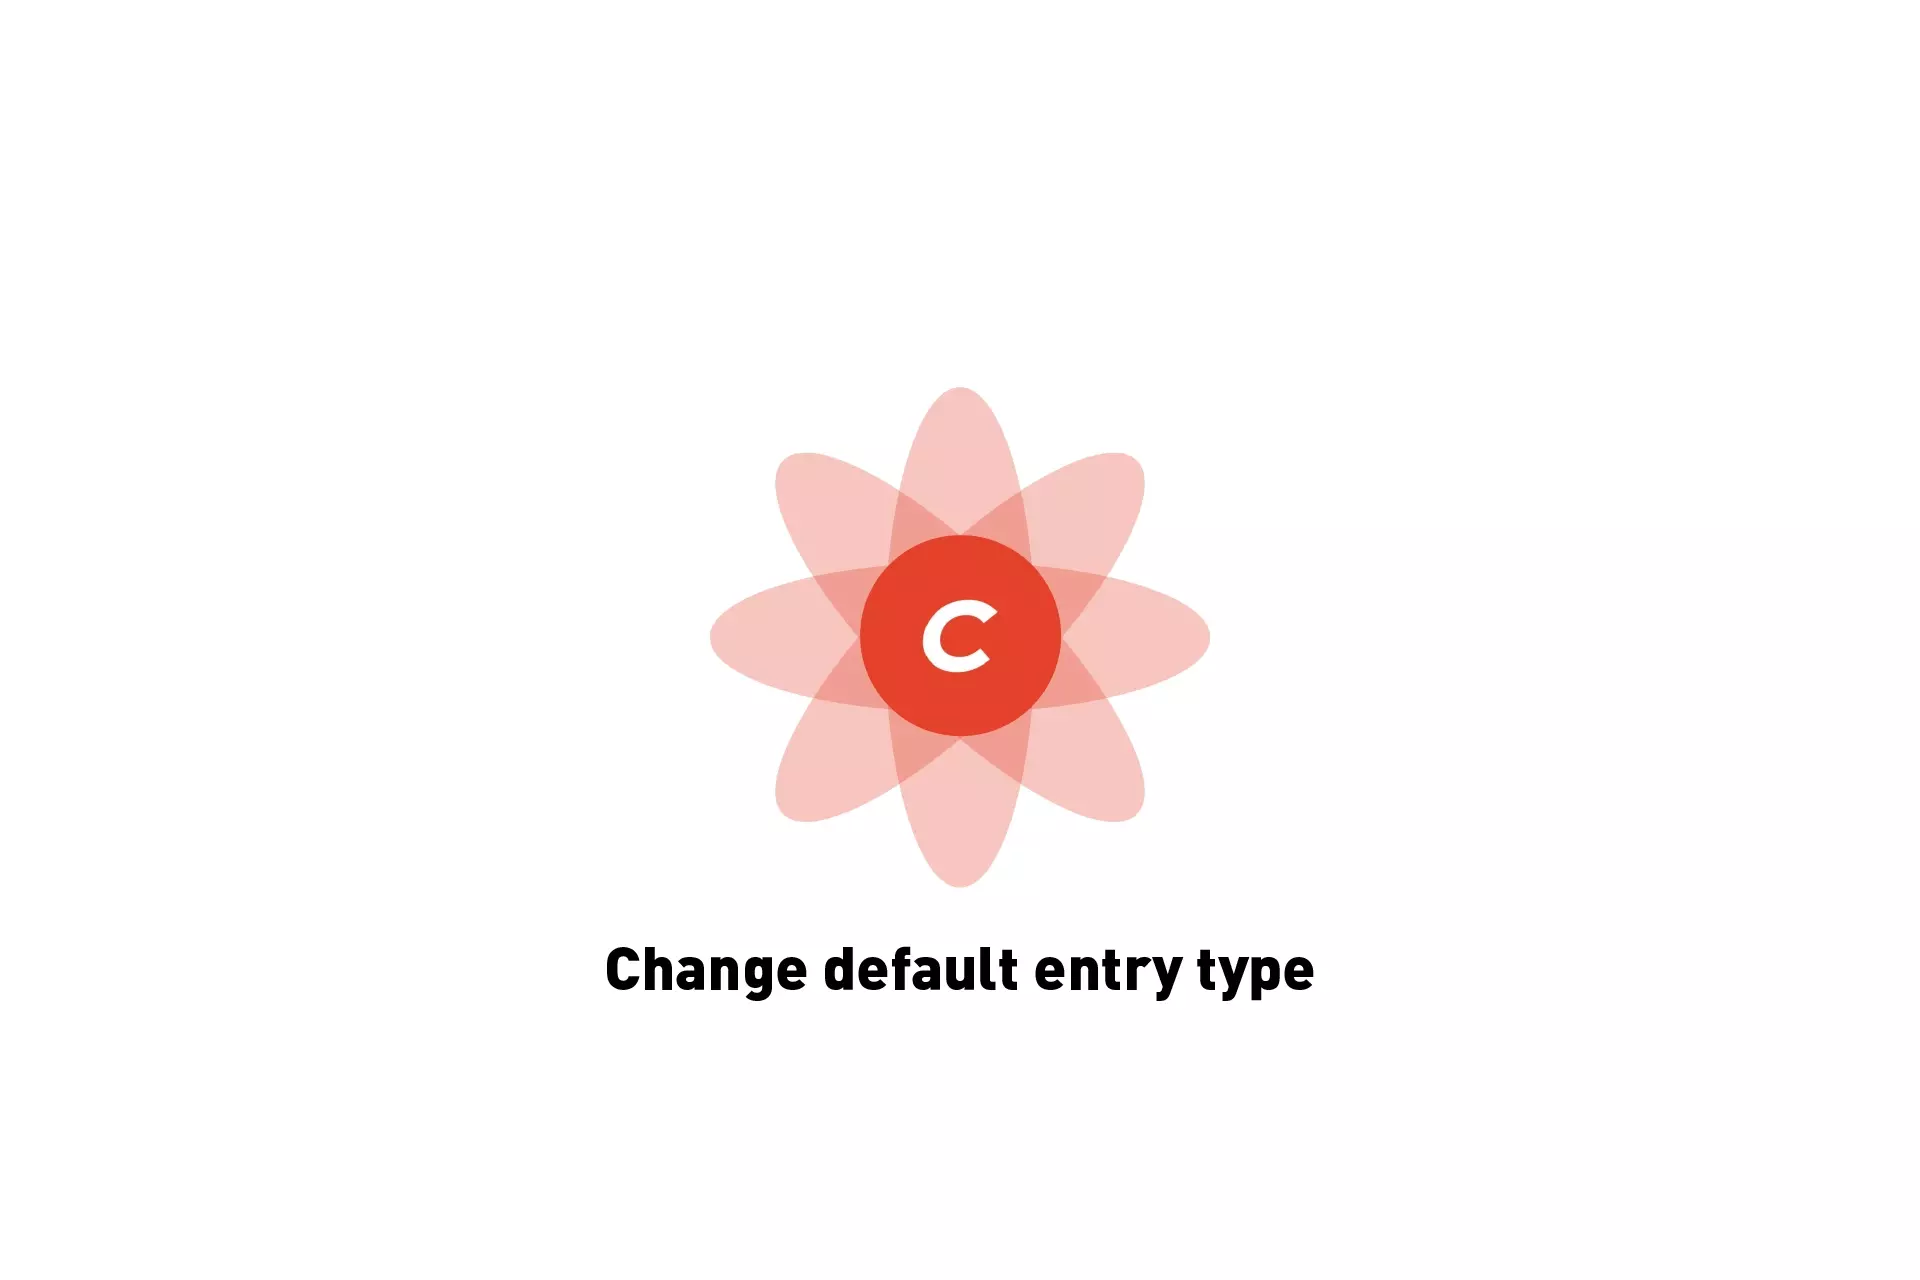 A flower that represents Craft CMS, beneath it sits the text "Change default entry type."